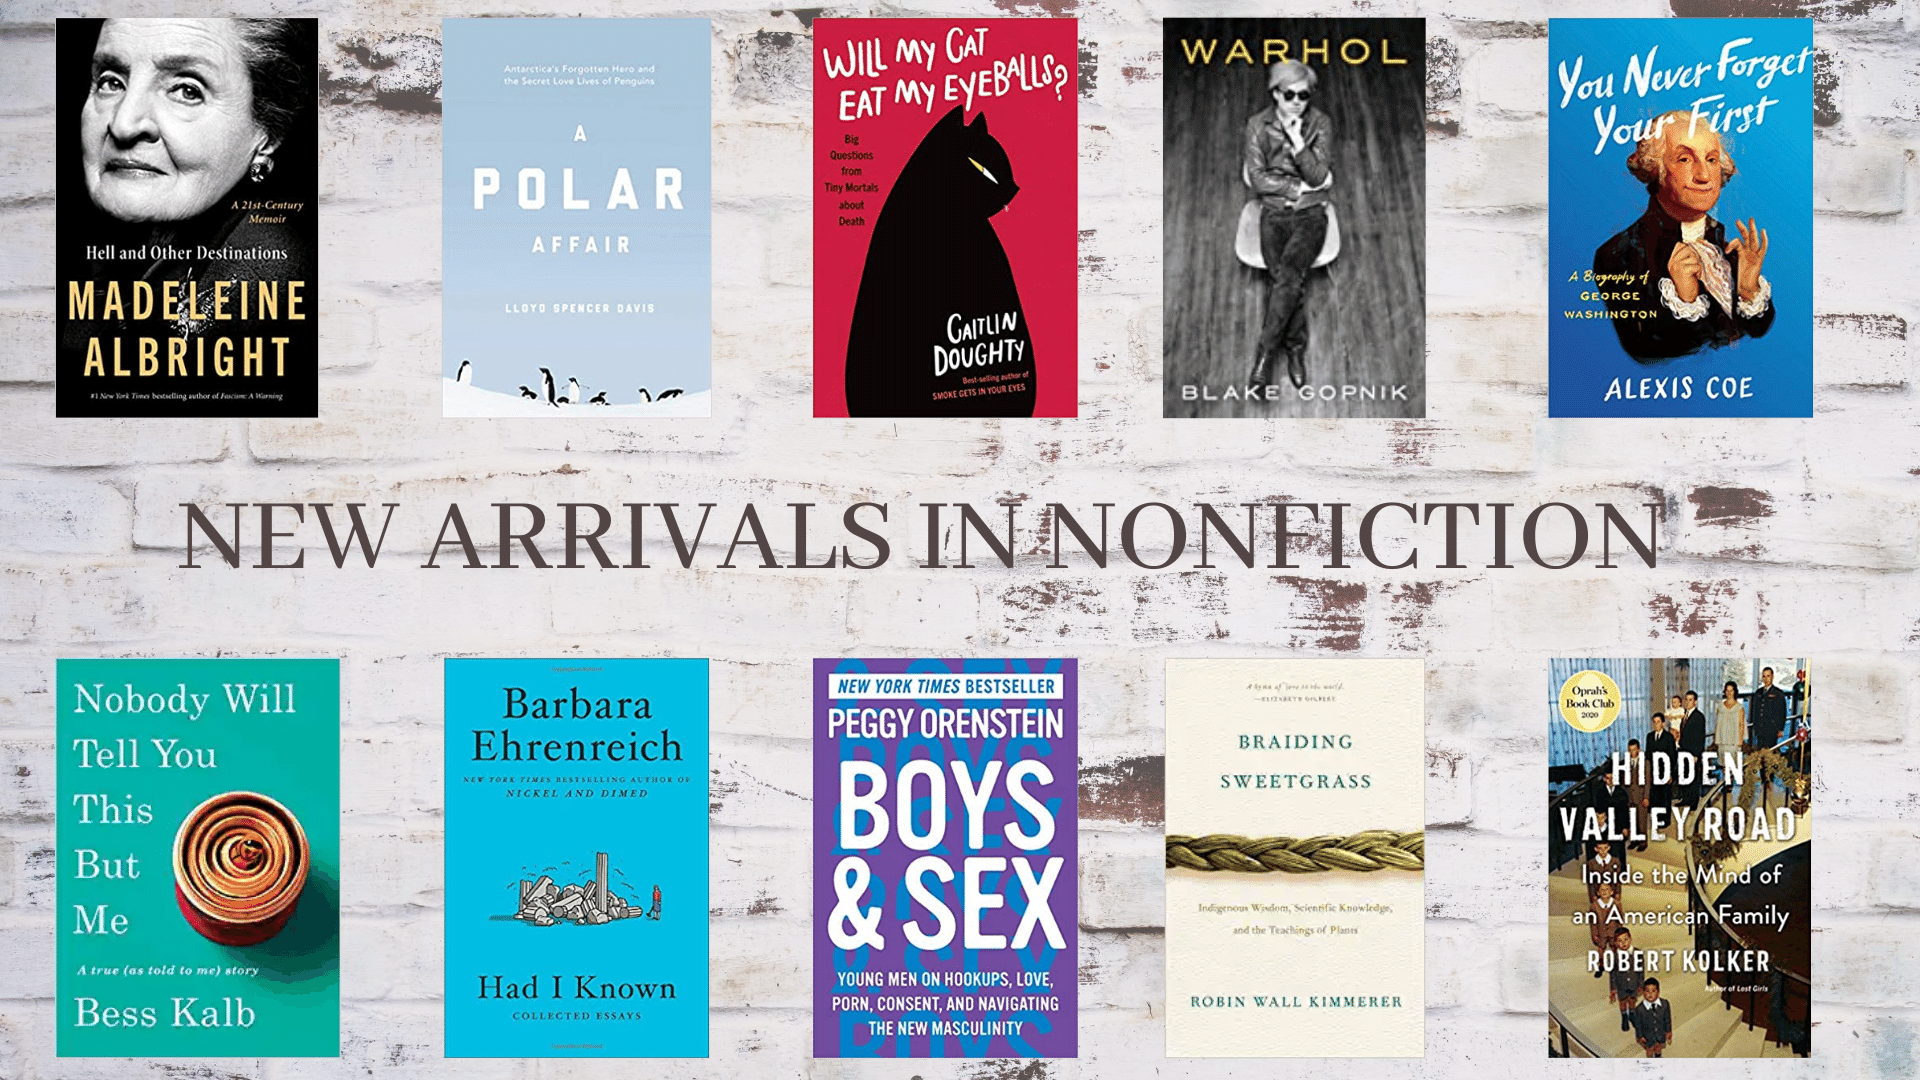 New Arrivals in Nonfiction